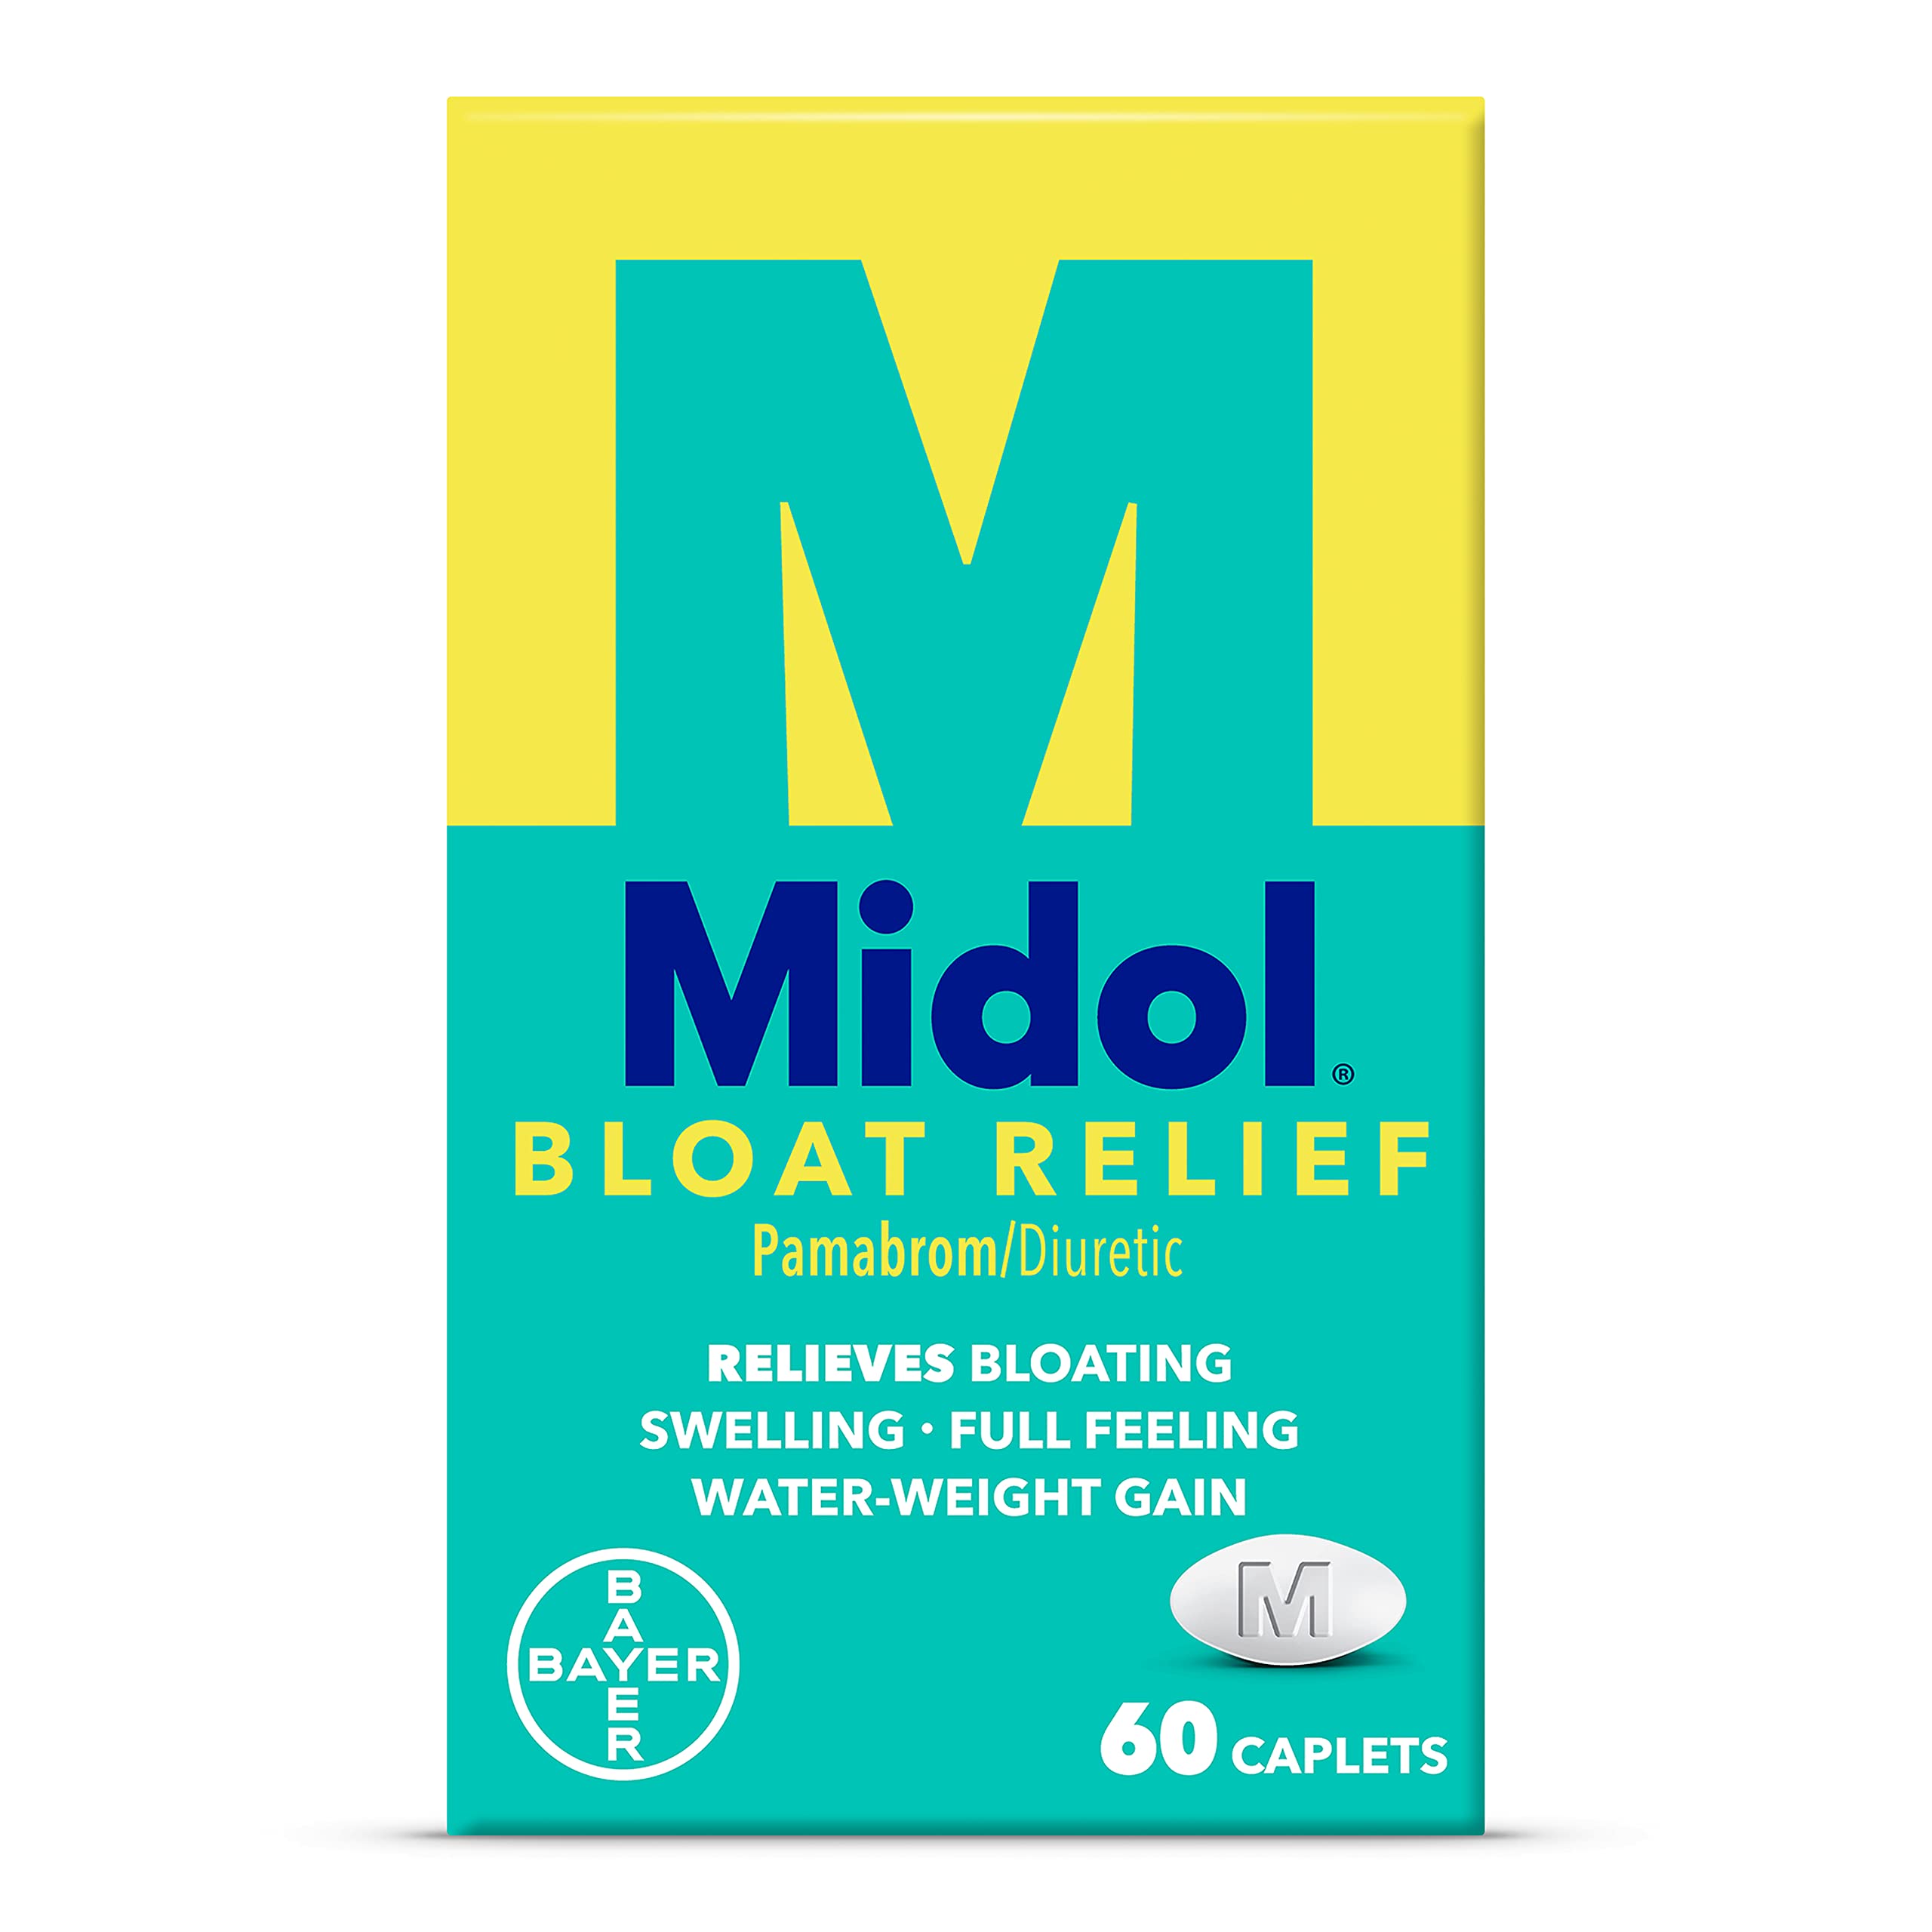 Midol Bloat Relief Caplets 60ct: Midol Bloat Relief Caplets with Pamabrom, Relieve Bloating Symptoms Before and During Your Peri